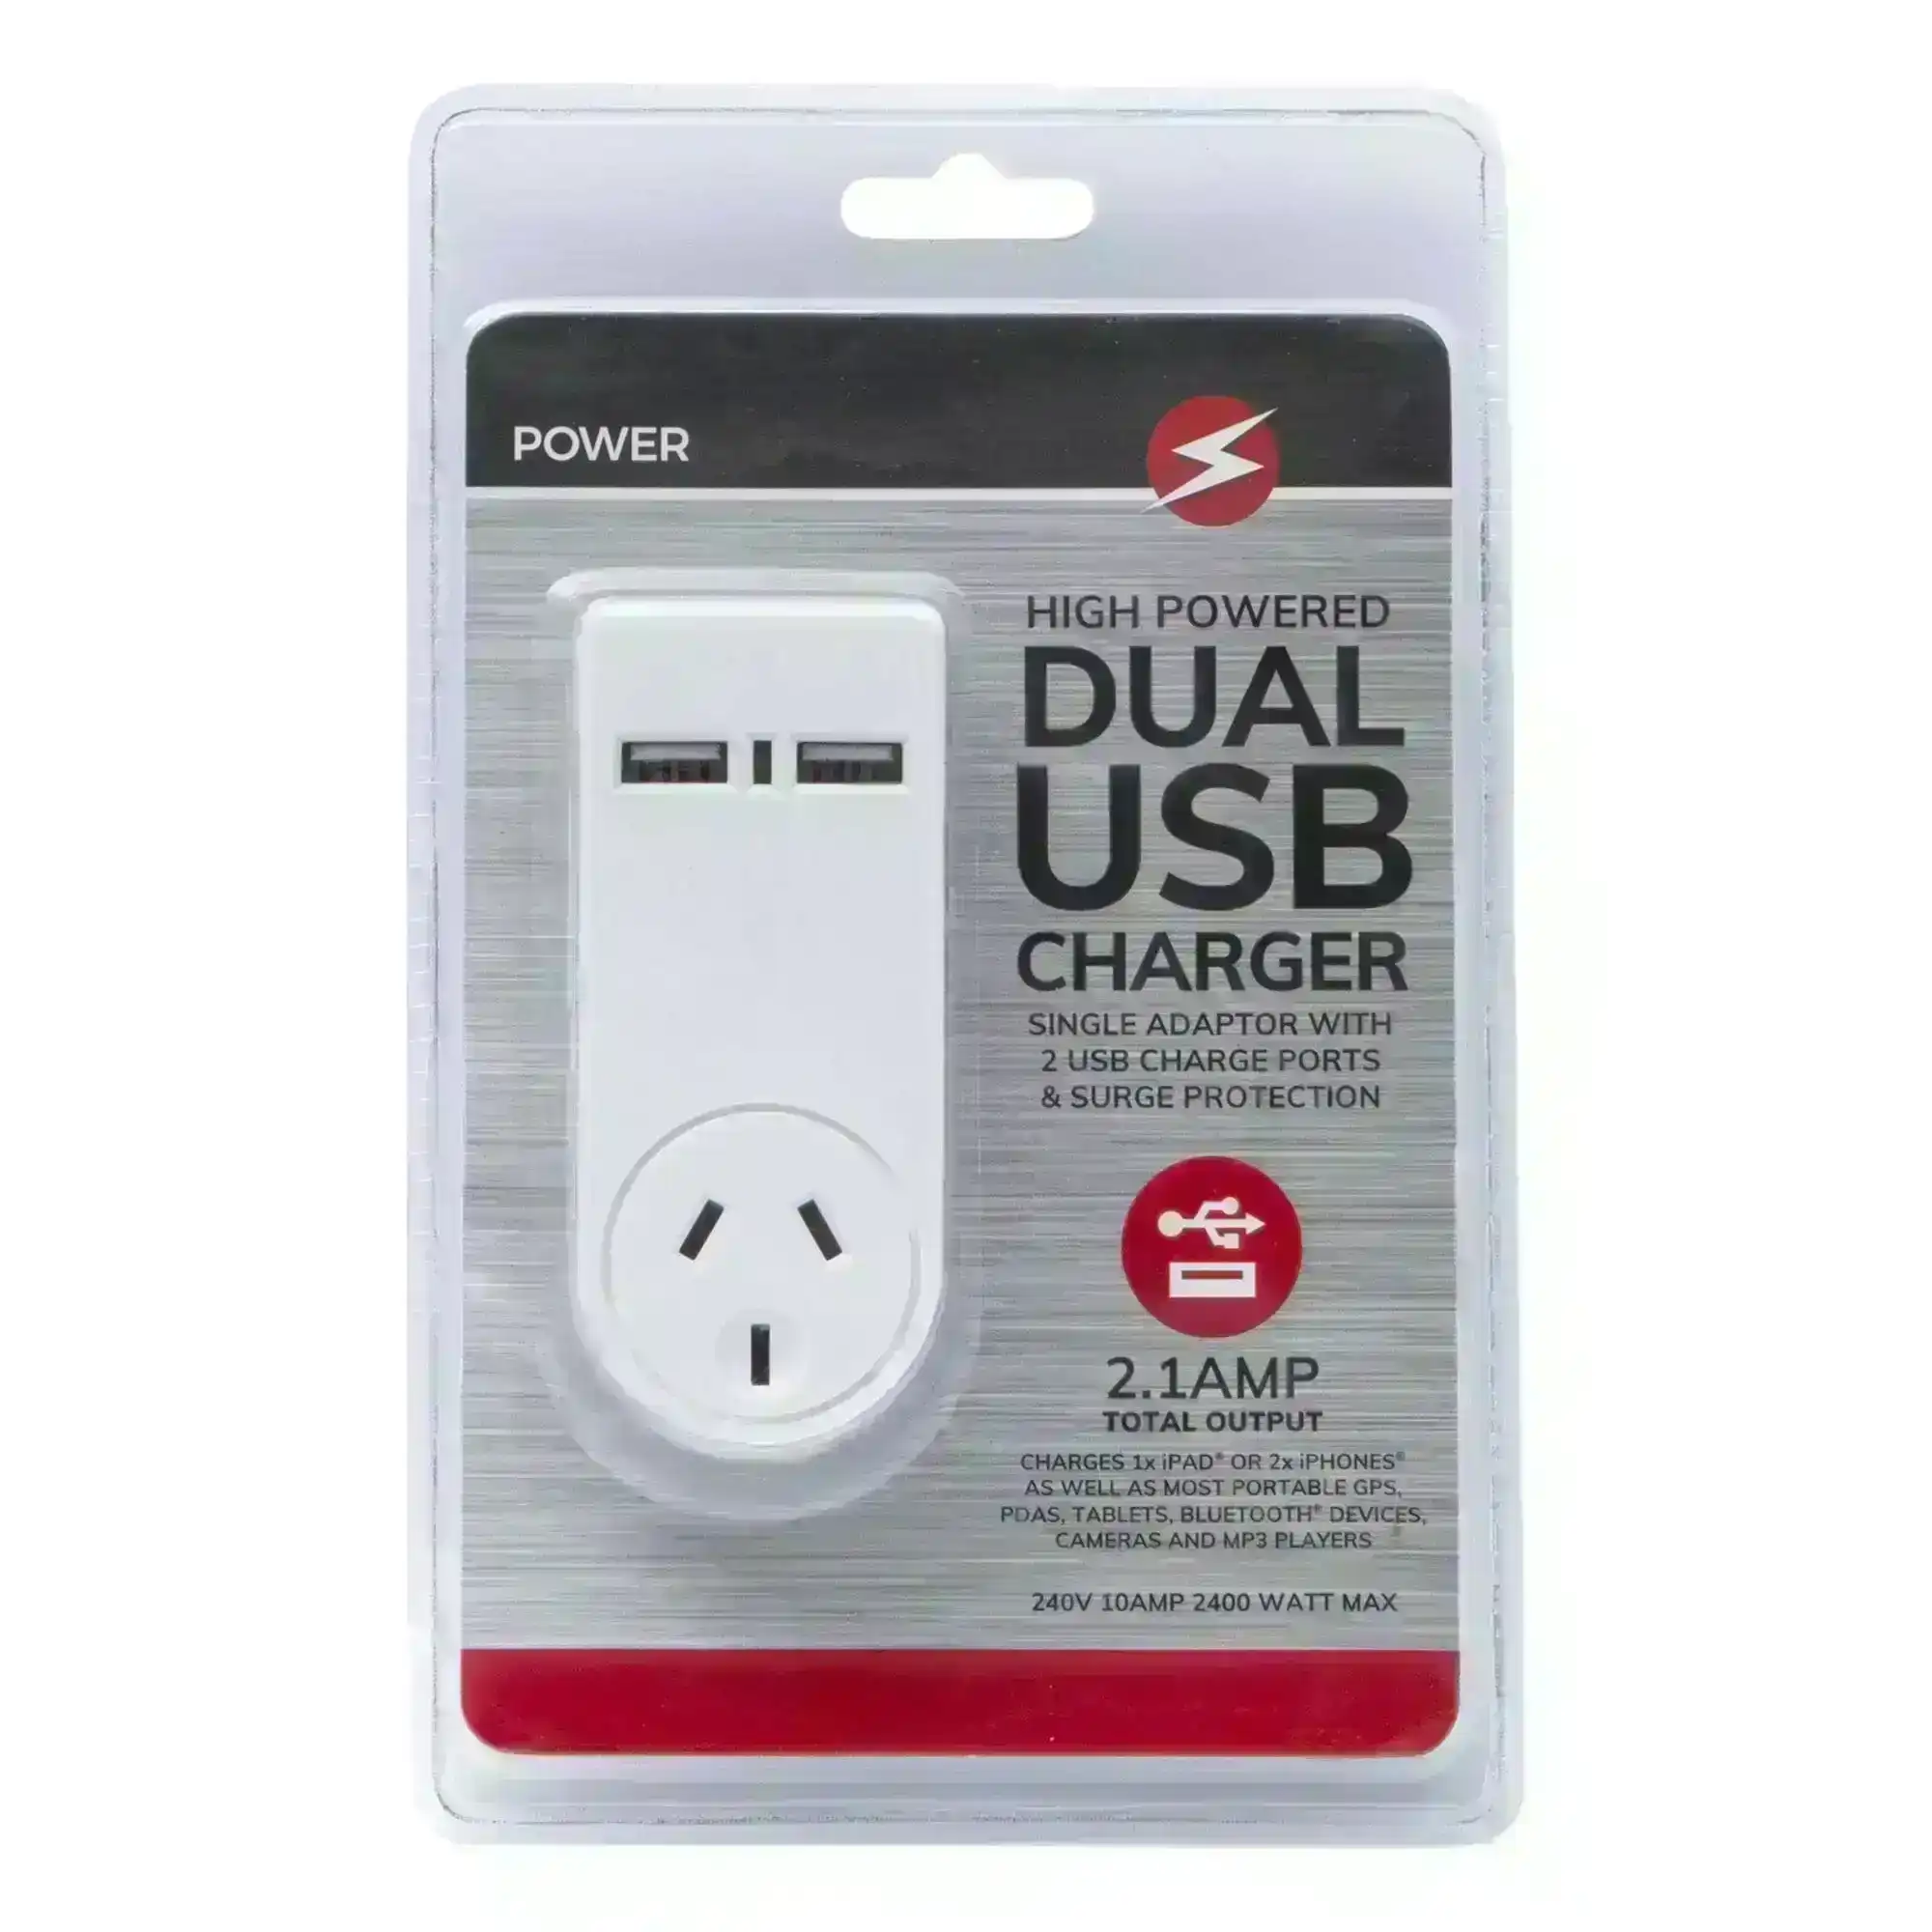 2 x 2400W High Powered Dual USB Charger Adaptor With Surge Protection